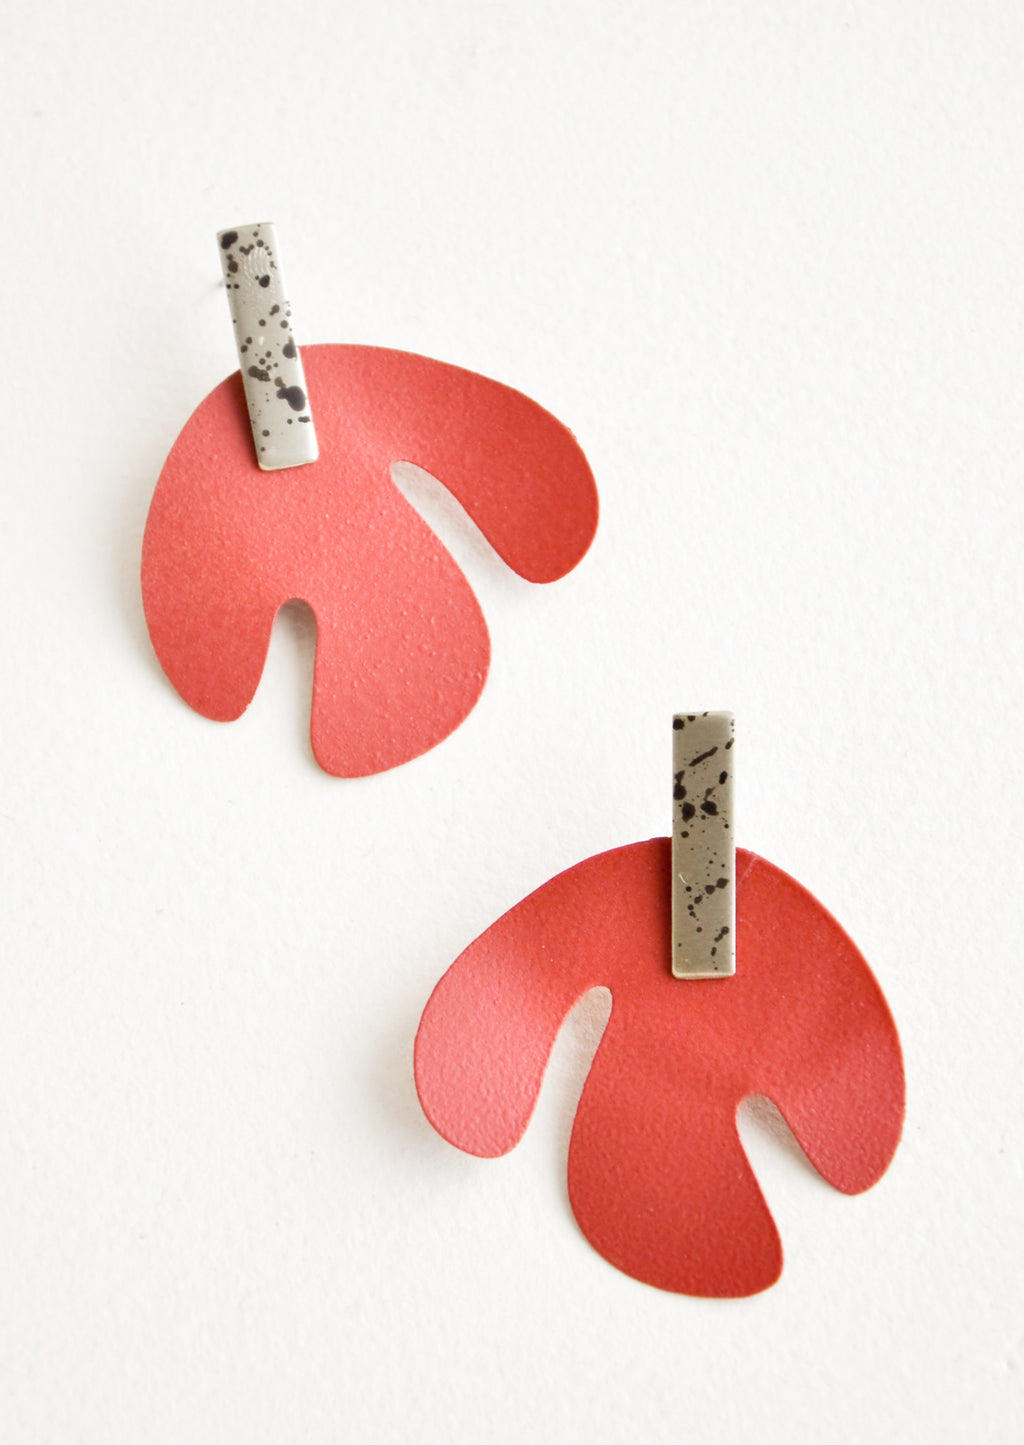 Sienna / Silver Spot: Post earrings with red asymmetric leaf shape hanging from small speckled rectangle.